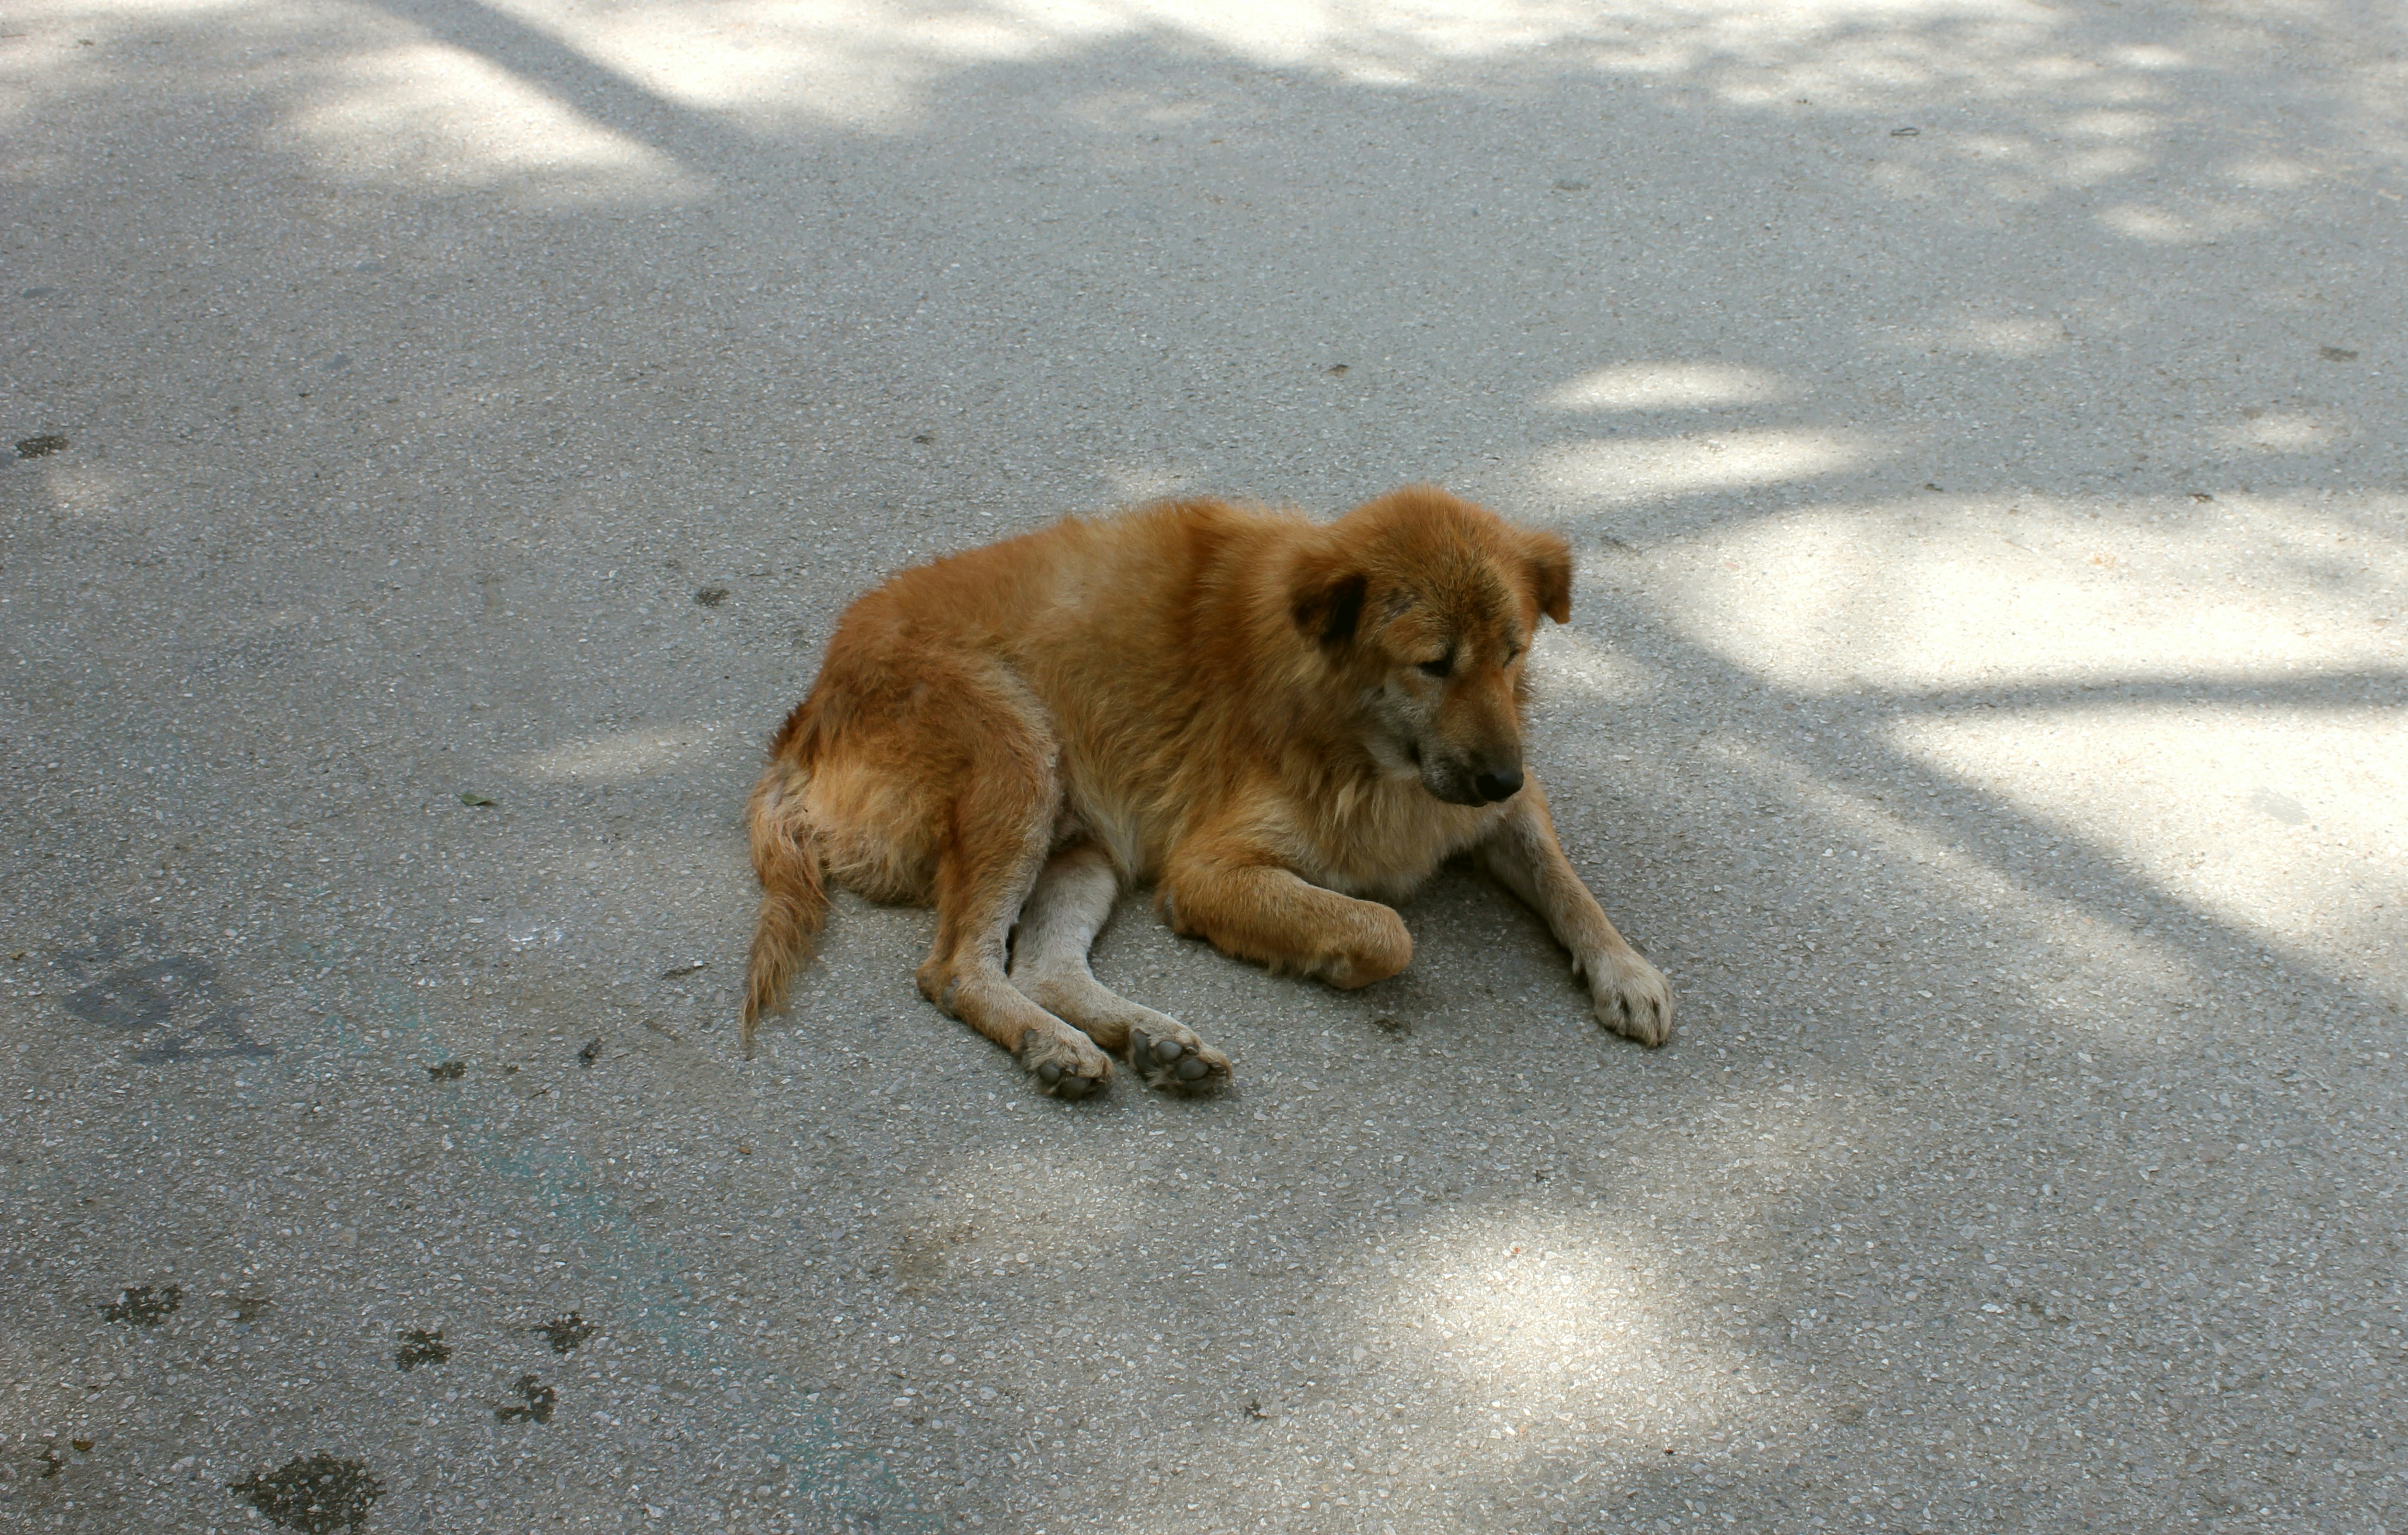 A street dog (known as soi dogs) in Thailand. There are many of them, and while they are usually dishevelled and a little rugged, they do tend to be fed by many different people - both tourists and locals. They're more like free-range urban dogs. Sometimes, however, they do look quite sad and in need of medical attention, or just a good bath.